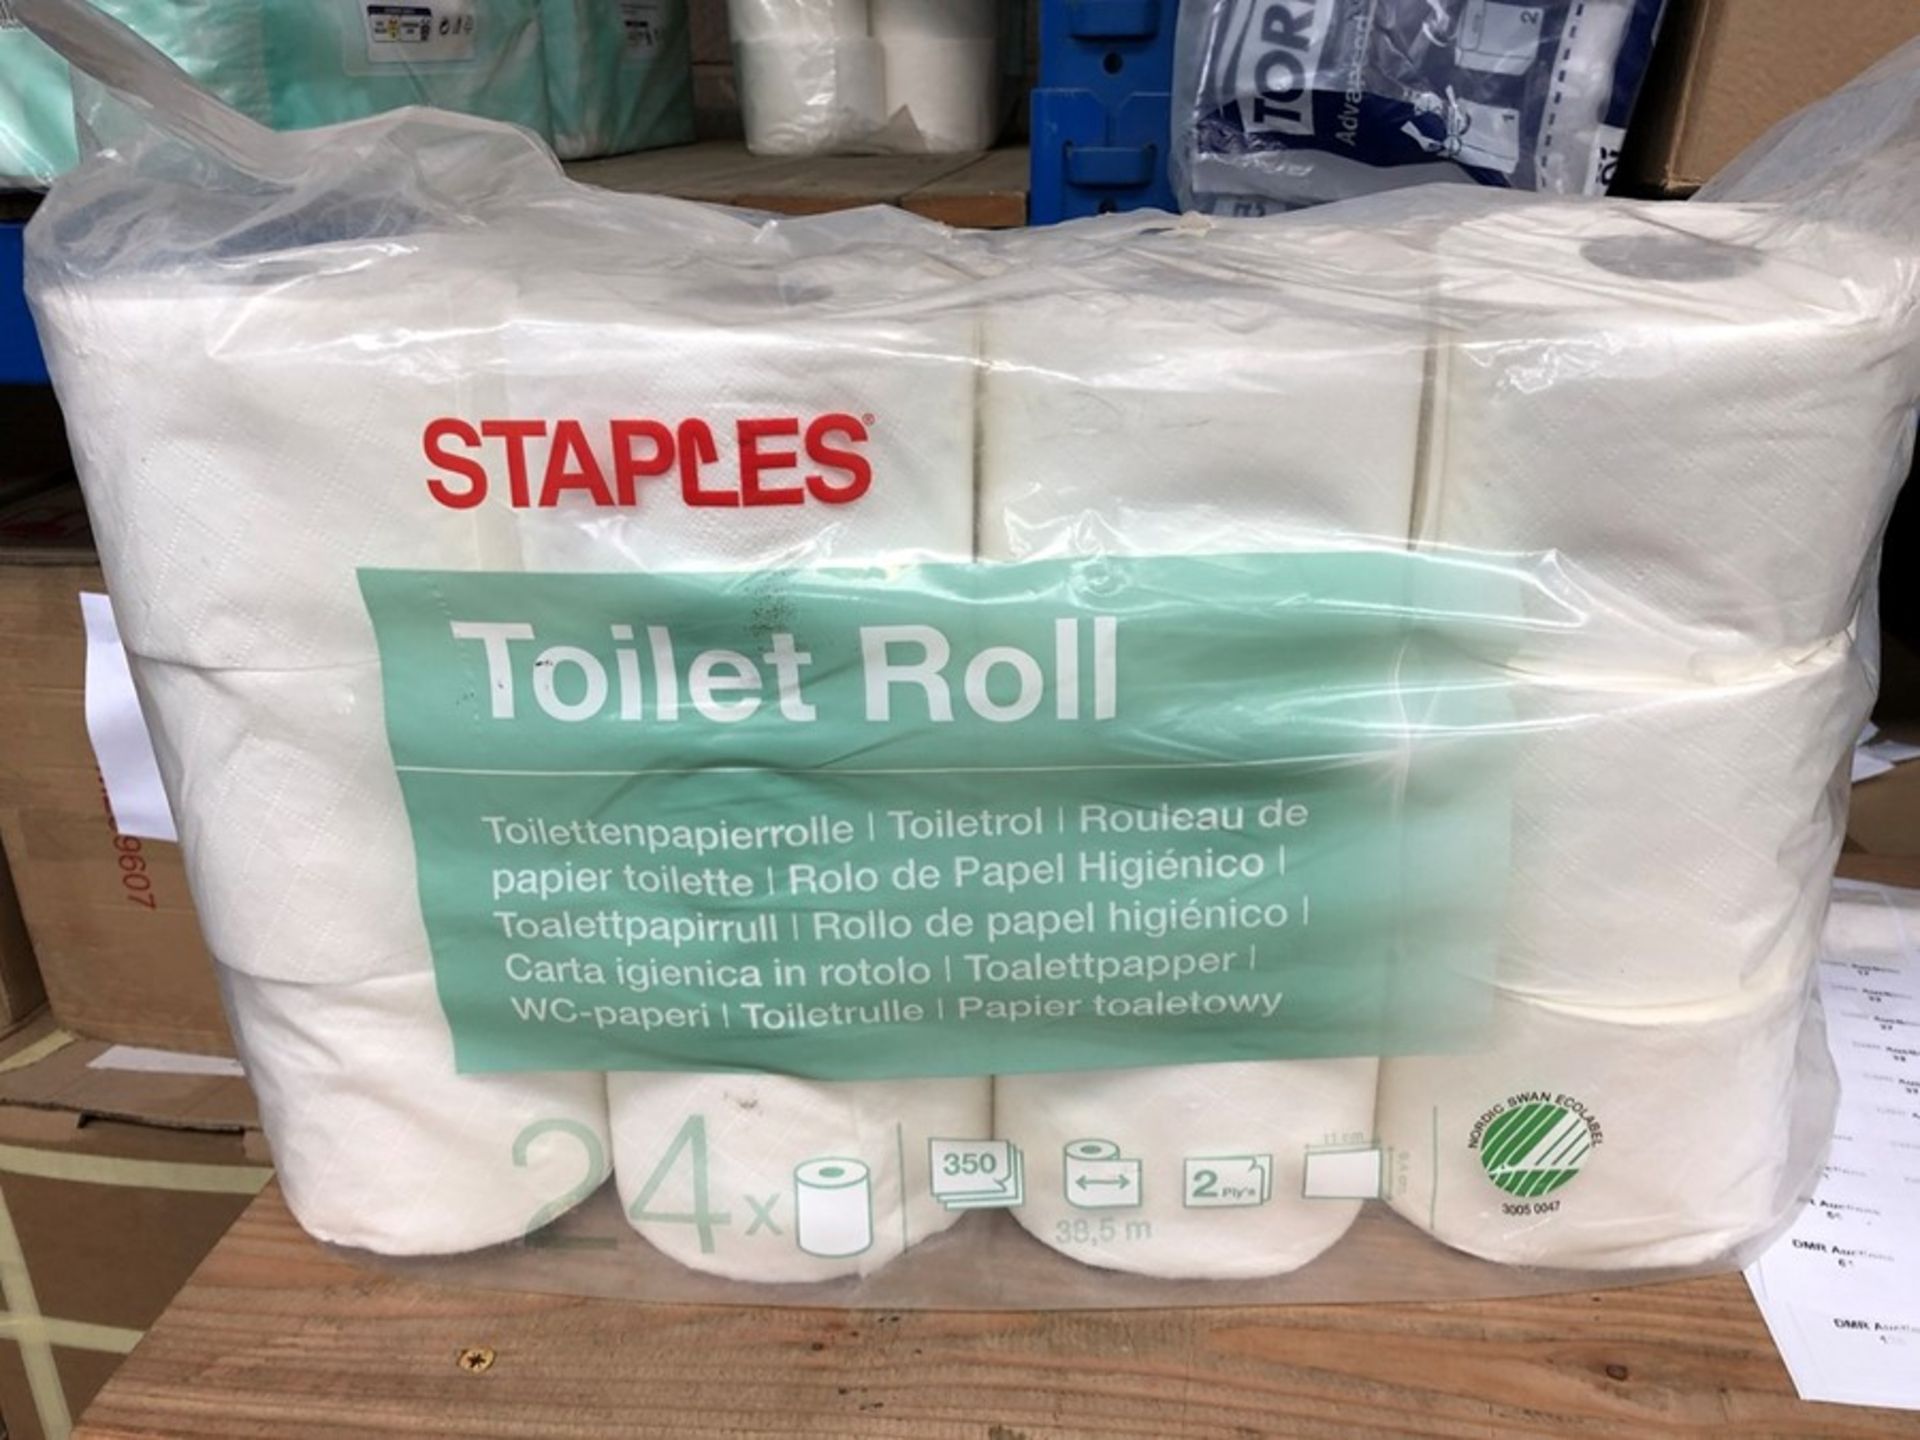 1 PACK CONTAINING 24 ROLLS OF STAPLES TOILET ROLL